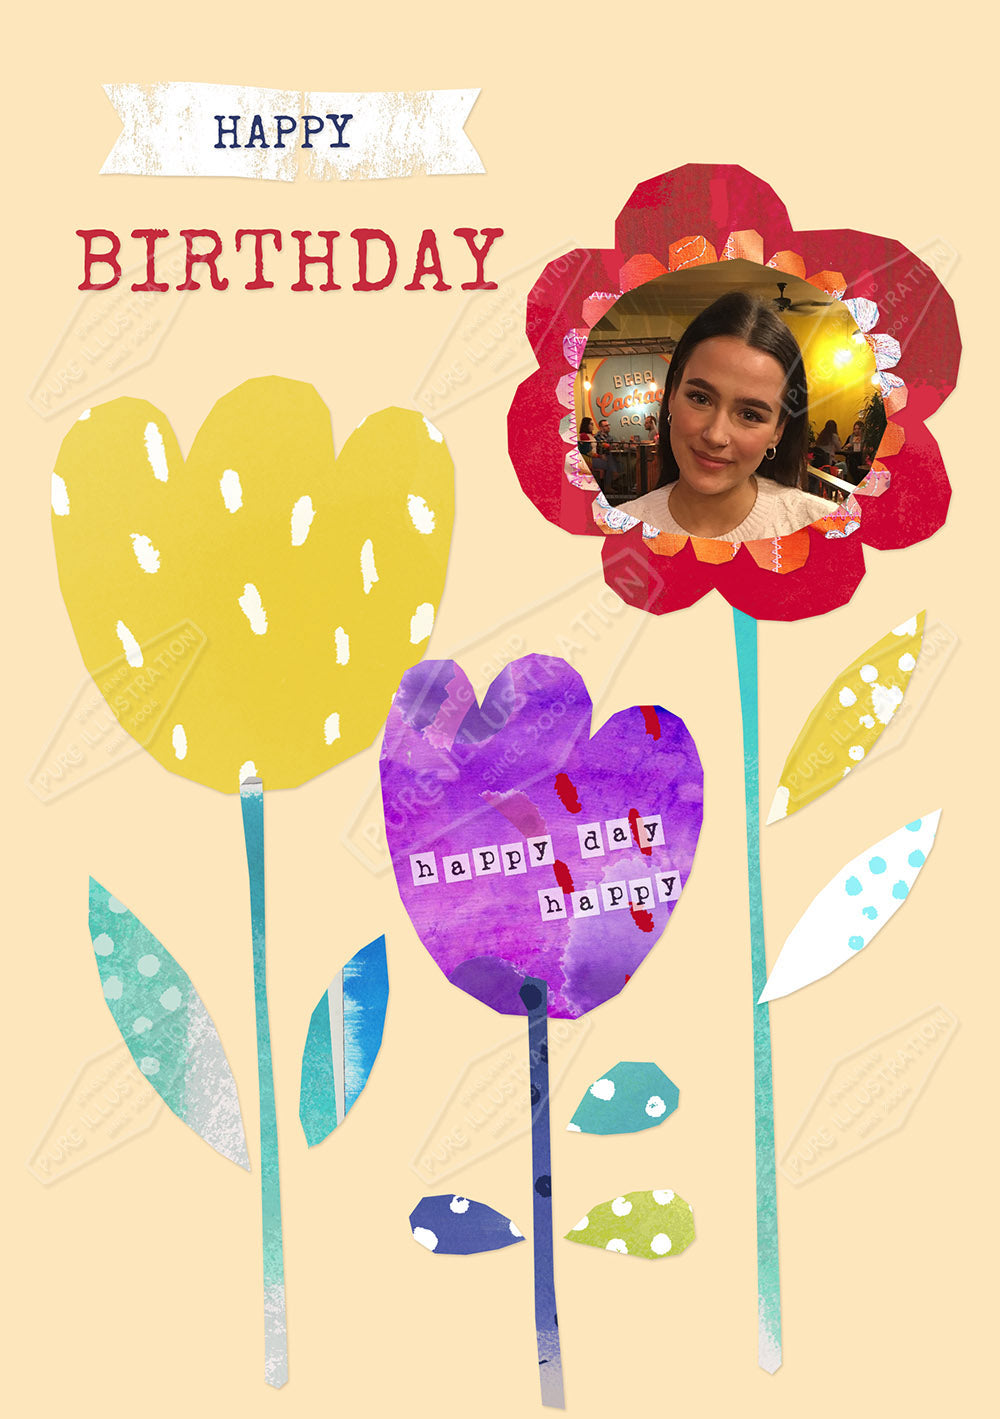 00033178KSP- Kerry Spurling is represented by Pure Art Licensing Agency - Birthday Greeting Card Design